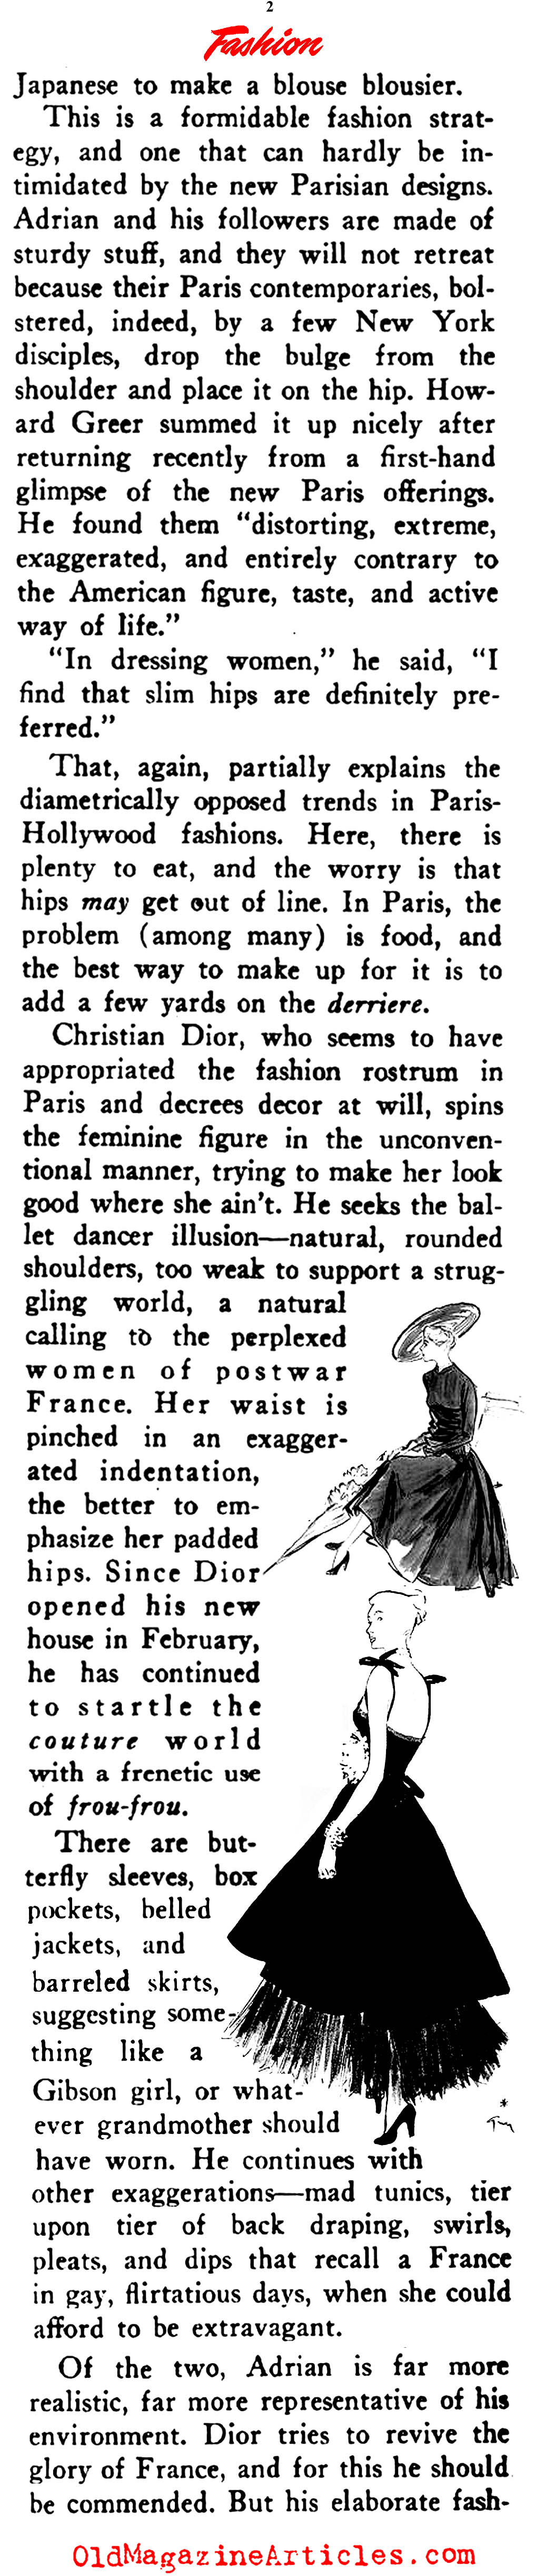 Down With Christian Dior and His ''New Look''! (Rob Wagner's Script, 1947)